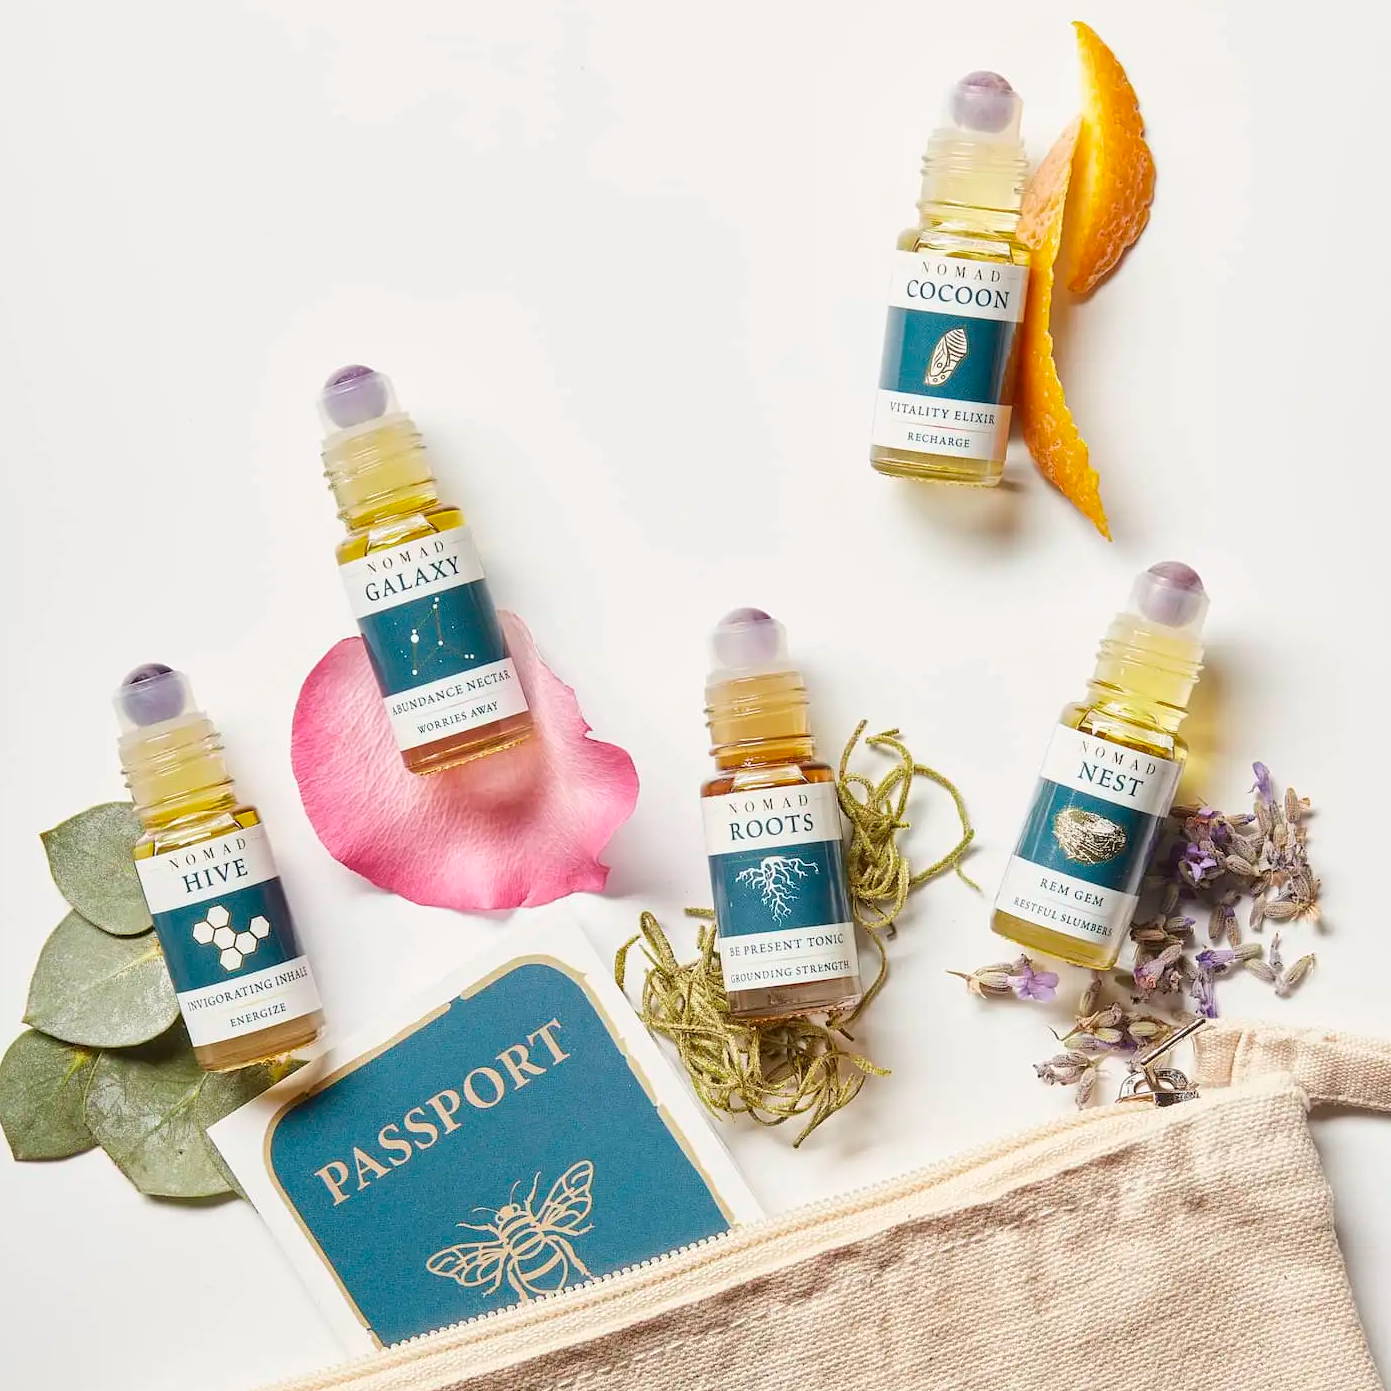 Five aromatherapy blends nested on corresponding botanicals near their travel pouch and passport brochure